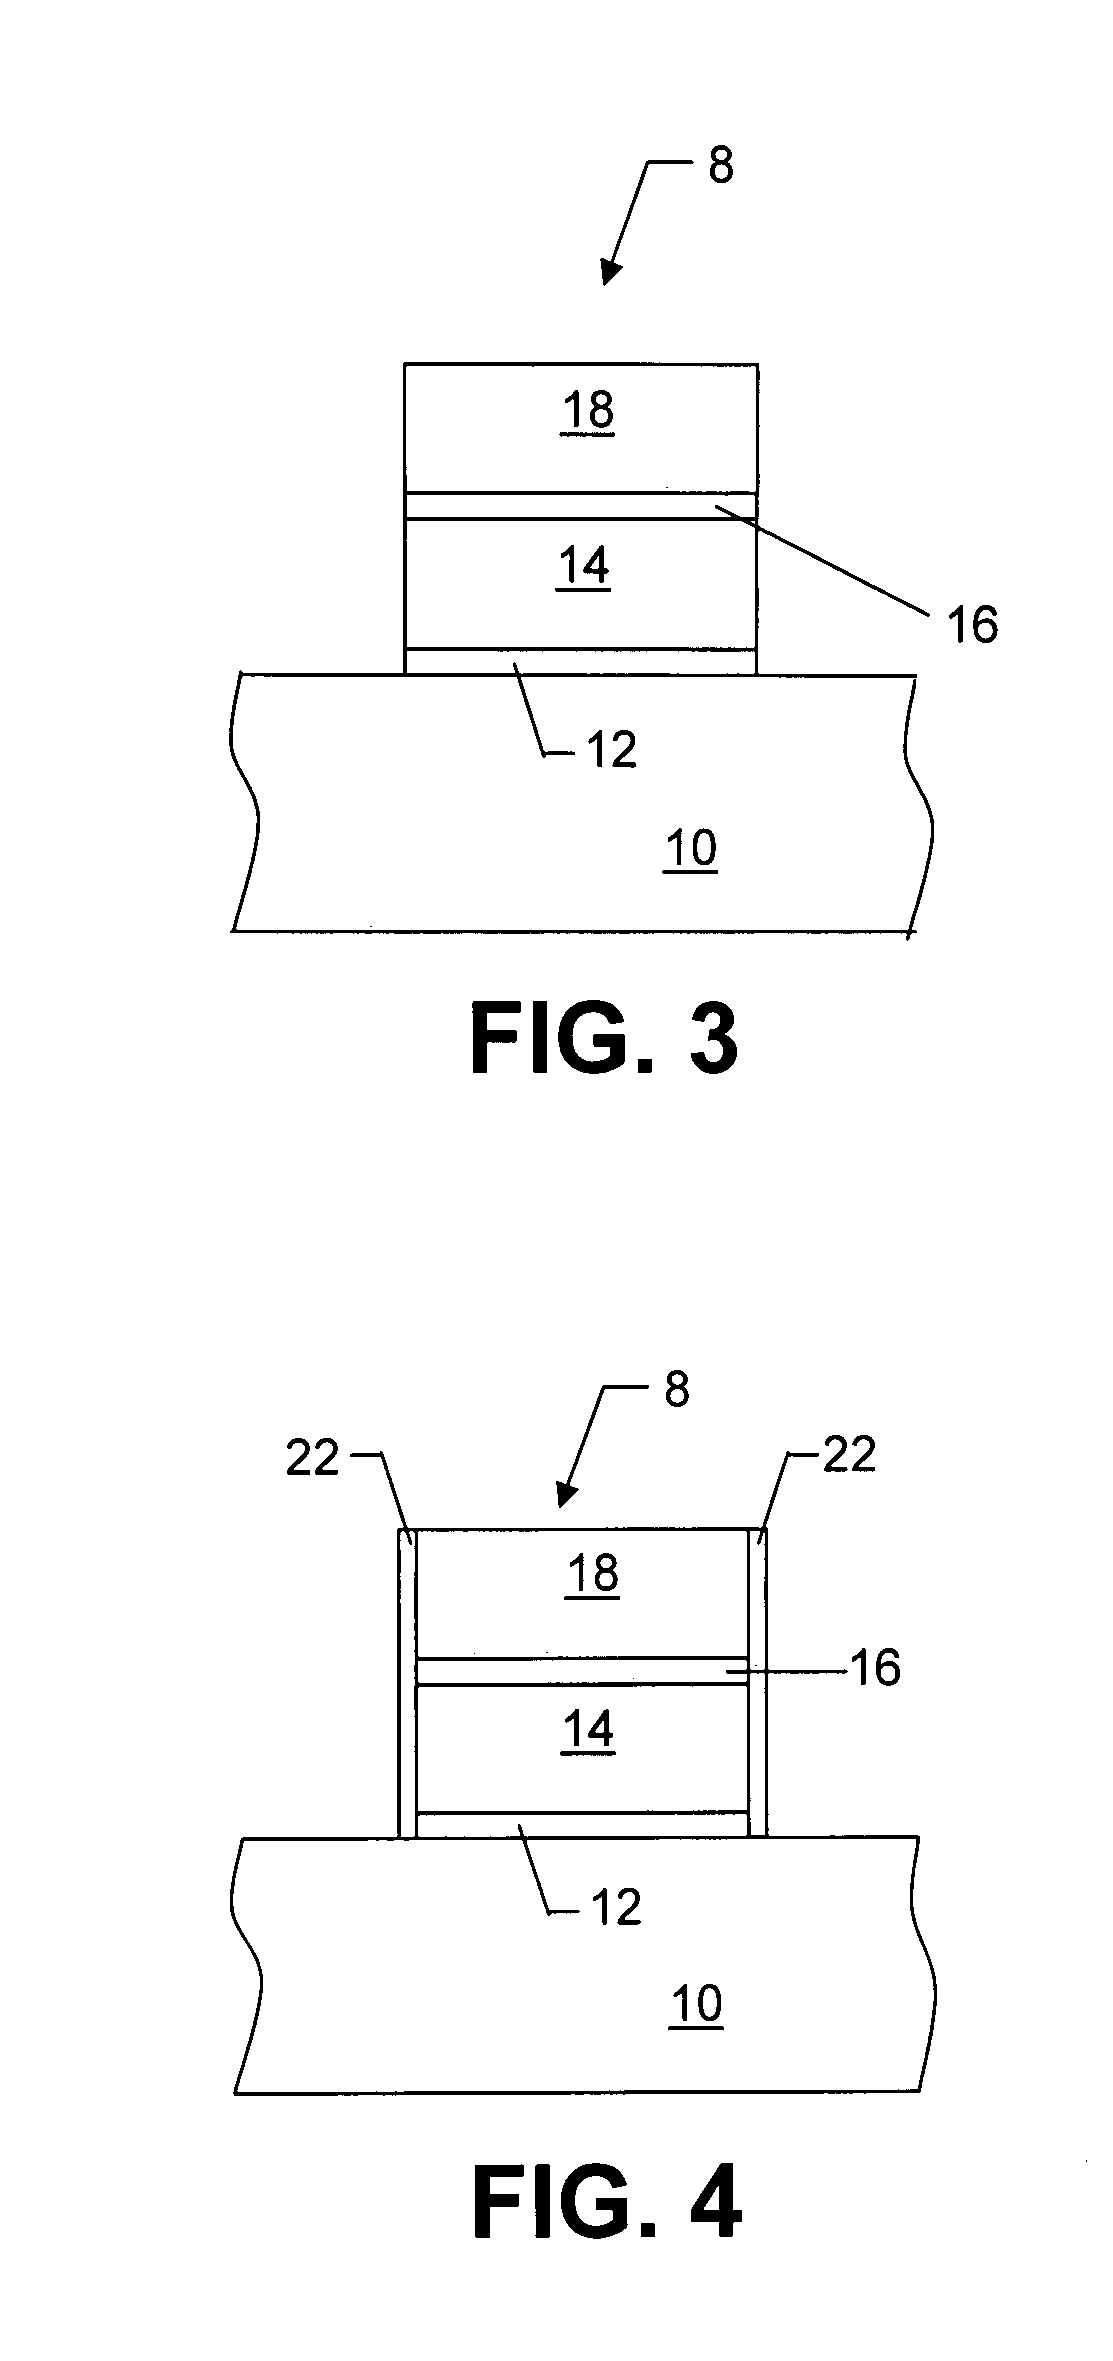 Non-volatile memory device having a nitride barrier to reduce the fast erase effect